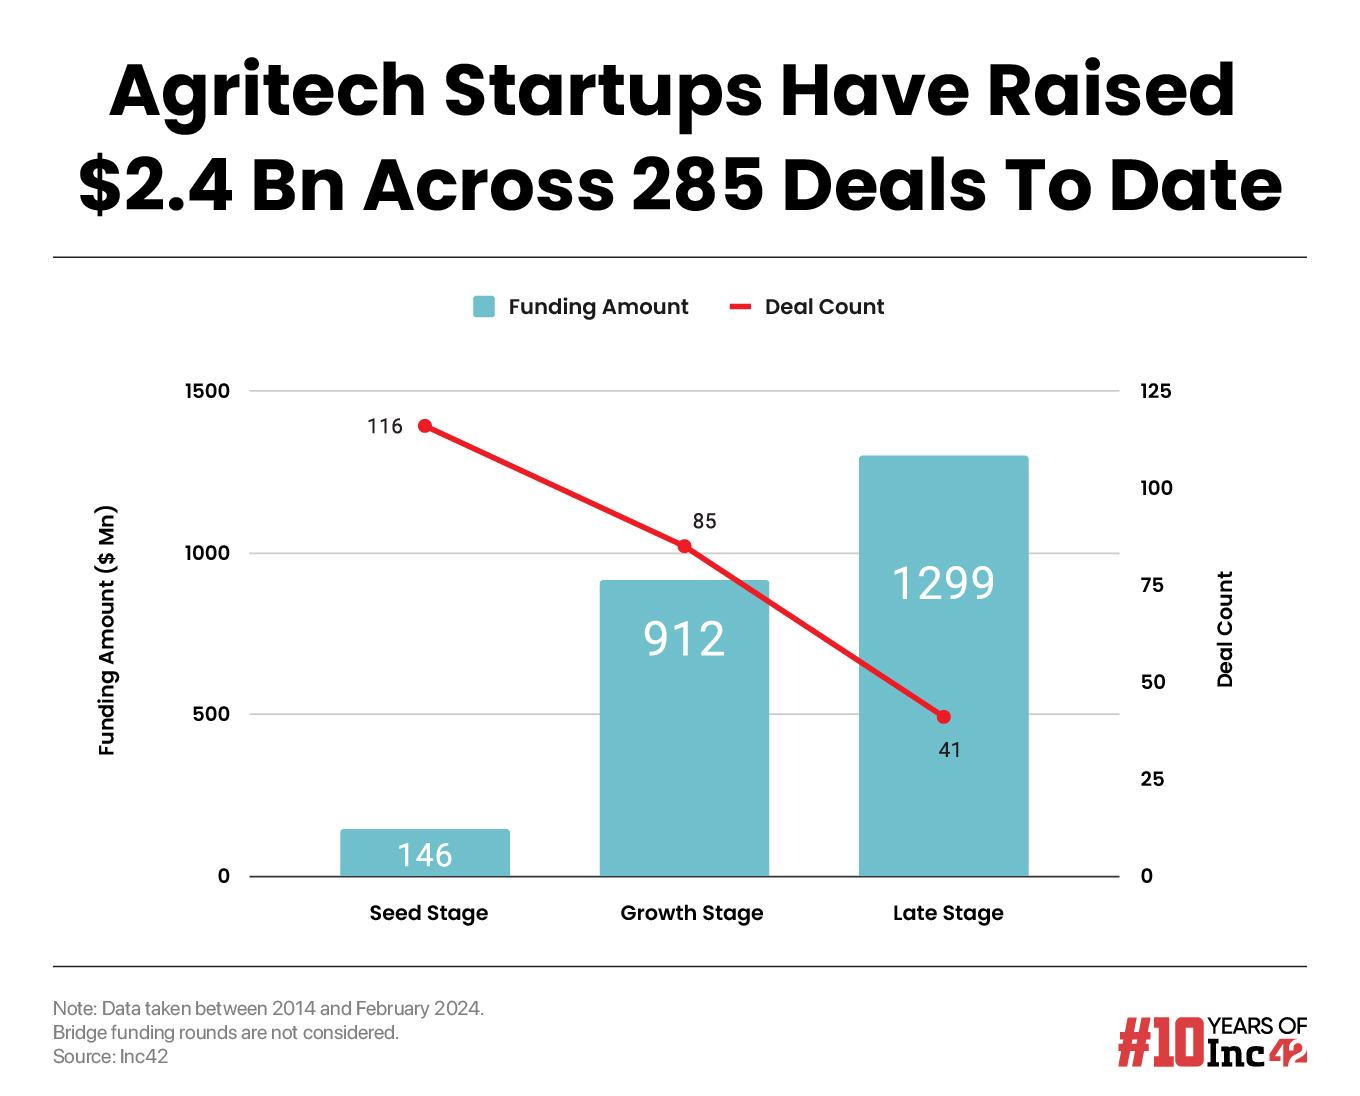 Harvesting Tech In Farming: A Deep Dive Into The $25 Bn Agritech Market Opportunity 